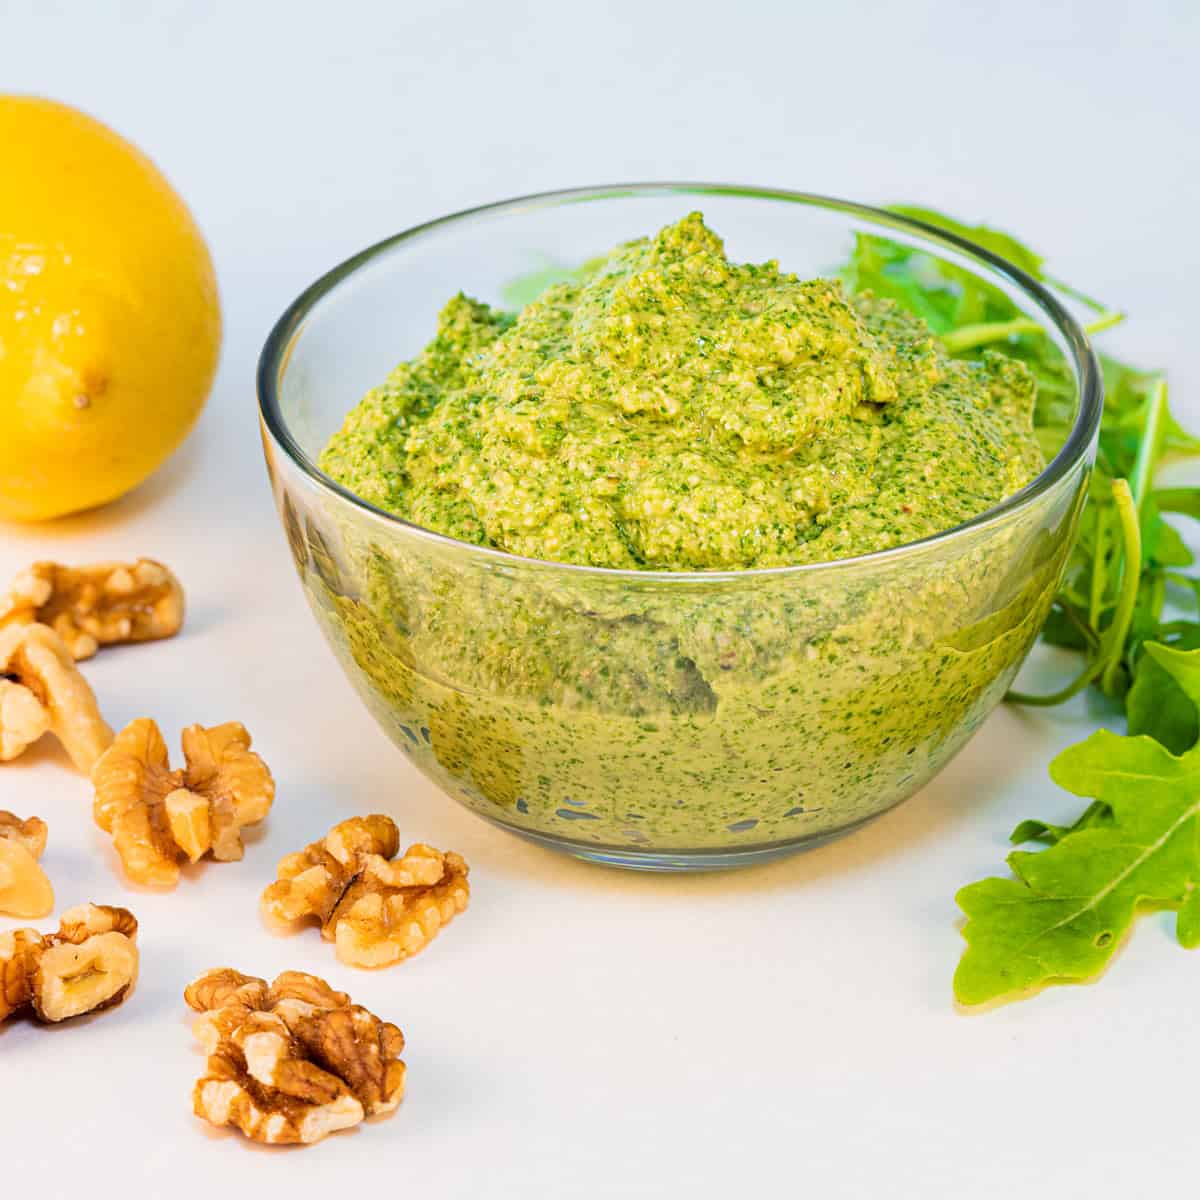 A bowl of arugula walnut pesto sauce with a lemon in the background and some walnuts scattered around.